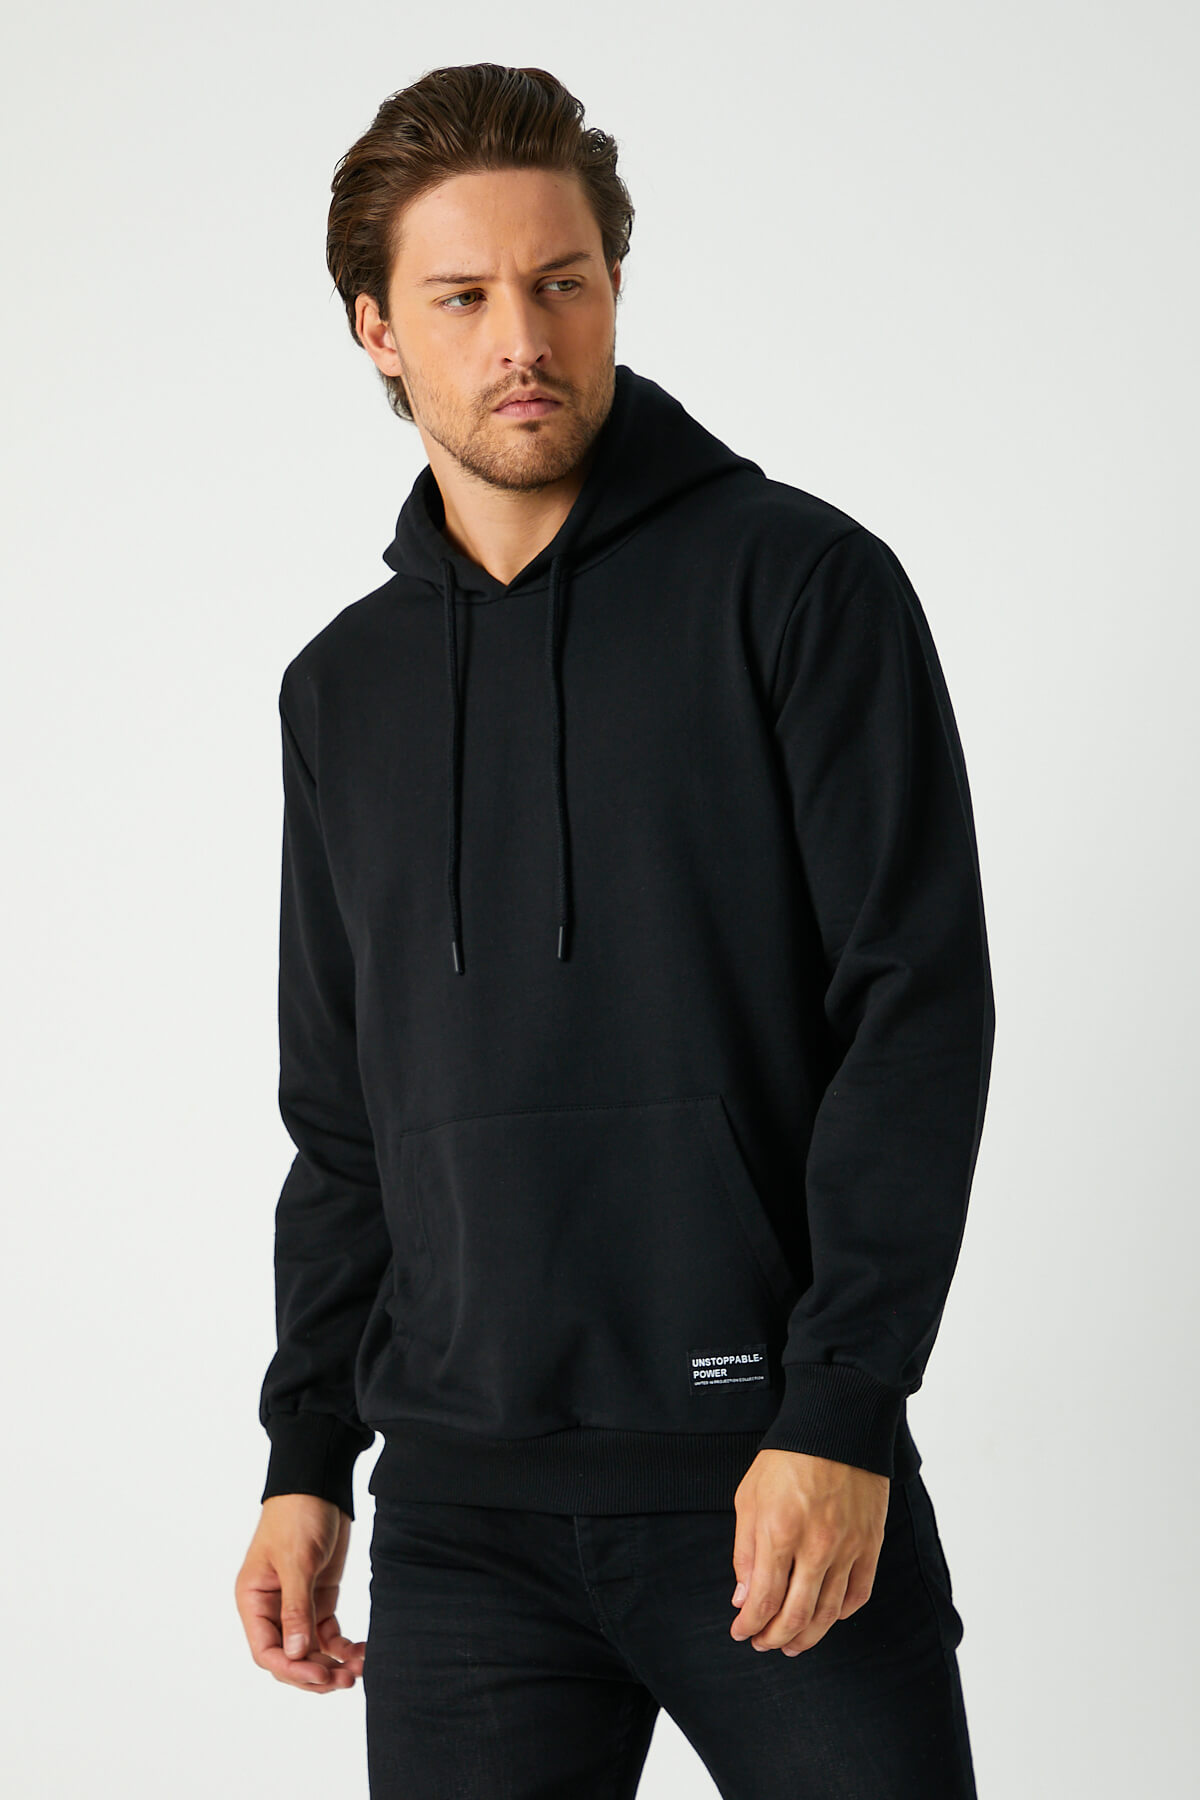 Hoodie - ByComeor - Wholesale Products